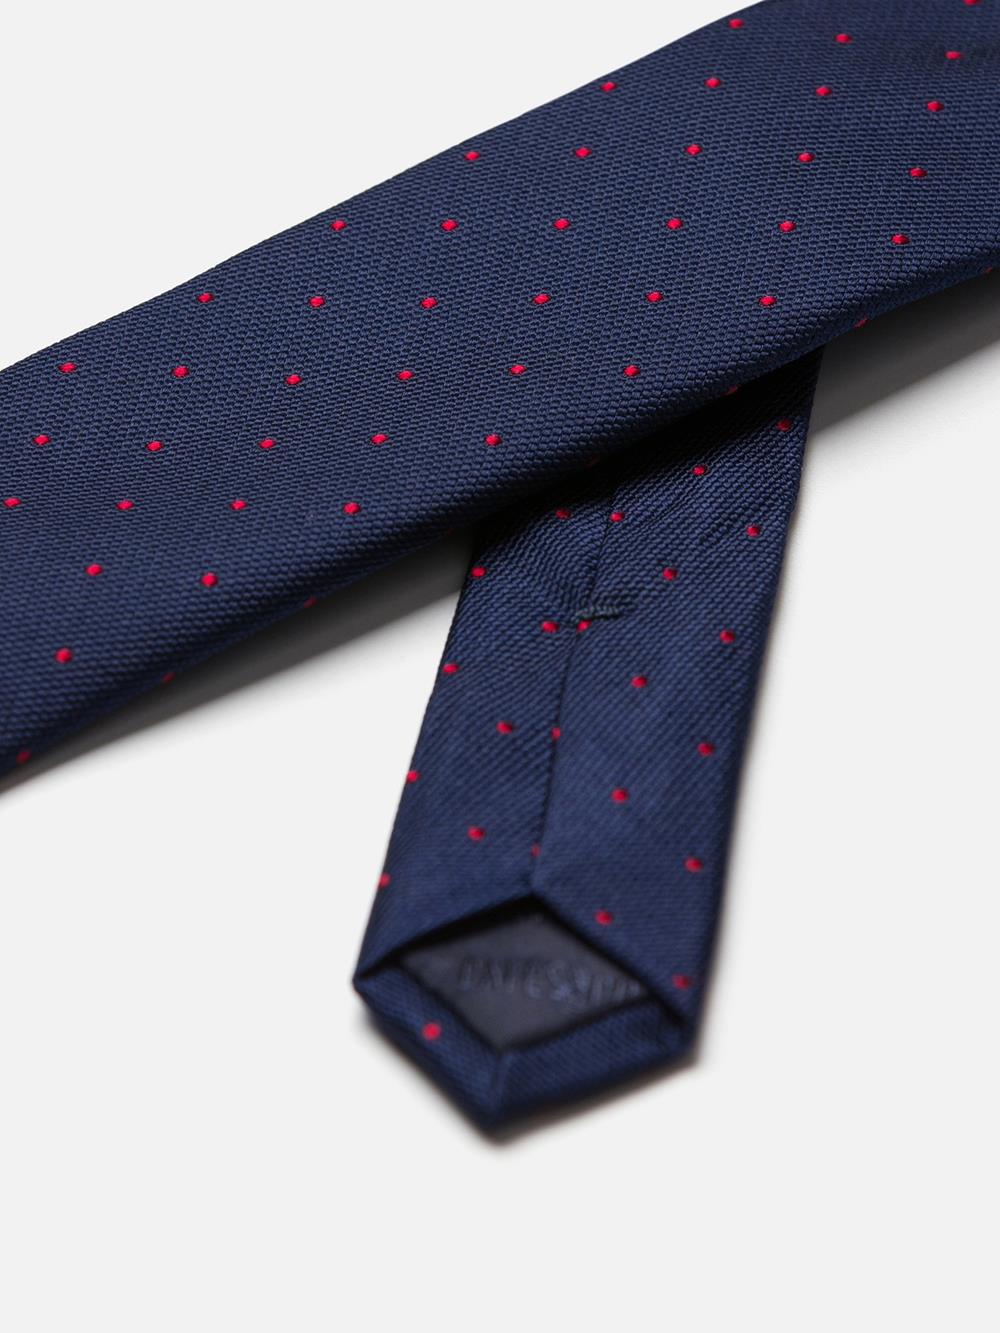 Slim silk tie with red polka dots